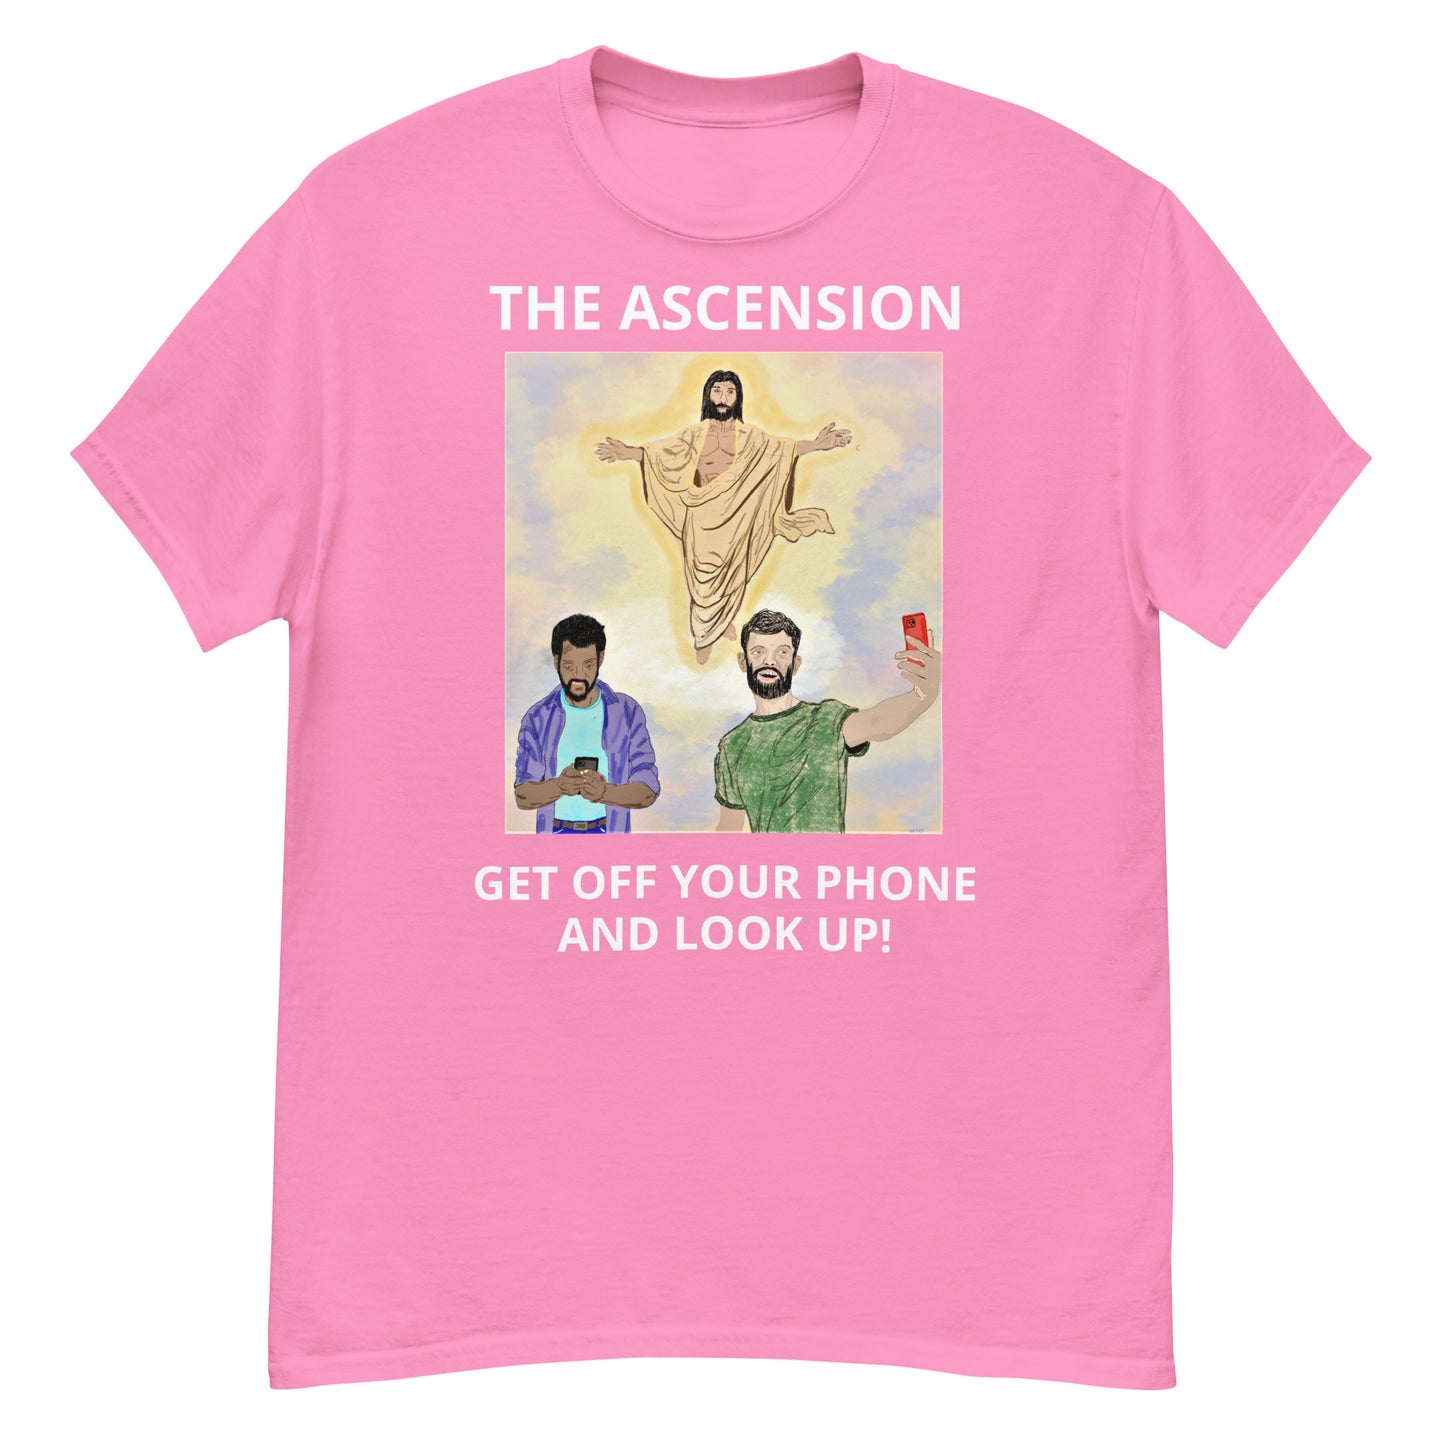 THE ASCENSION Men's classic tee